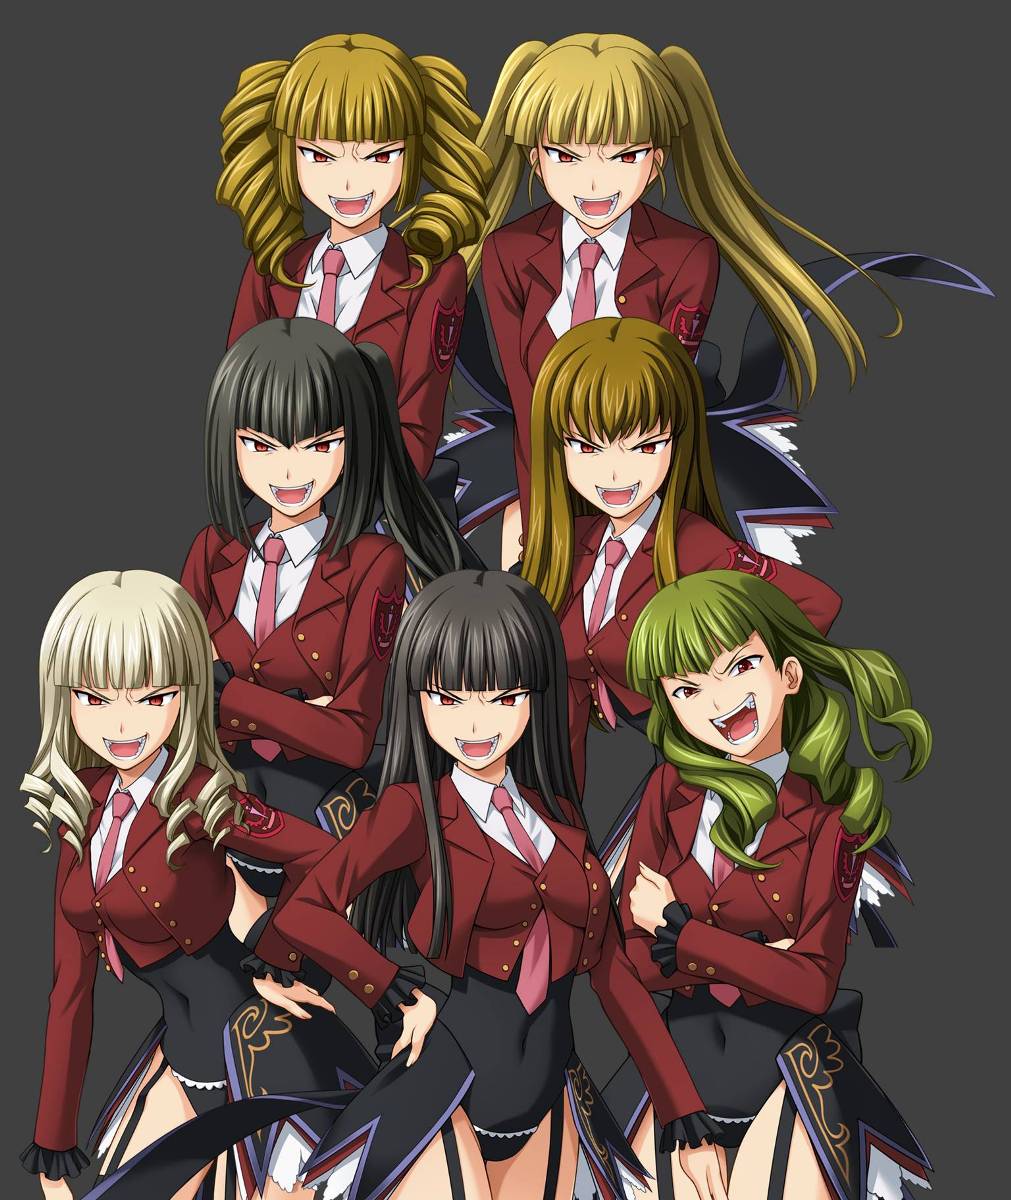 The Seven Stakes of Purgatory are a group from the Umineko When They Cry se...